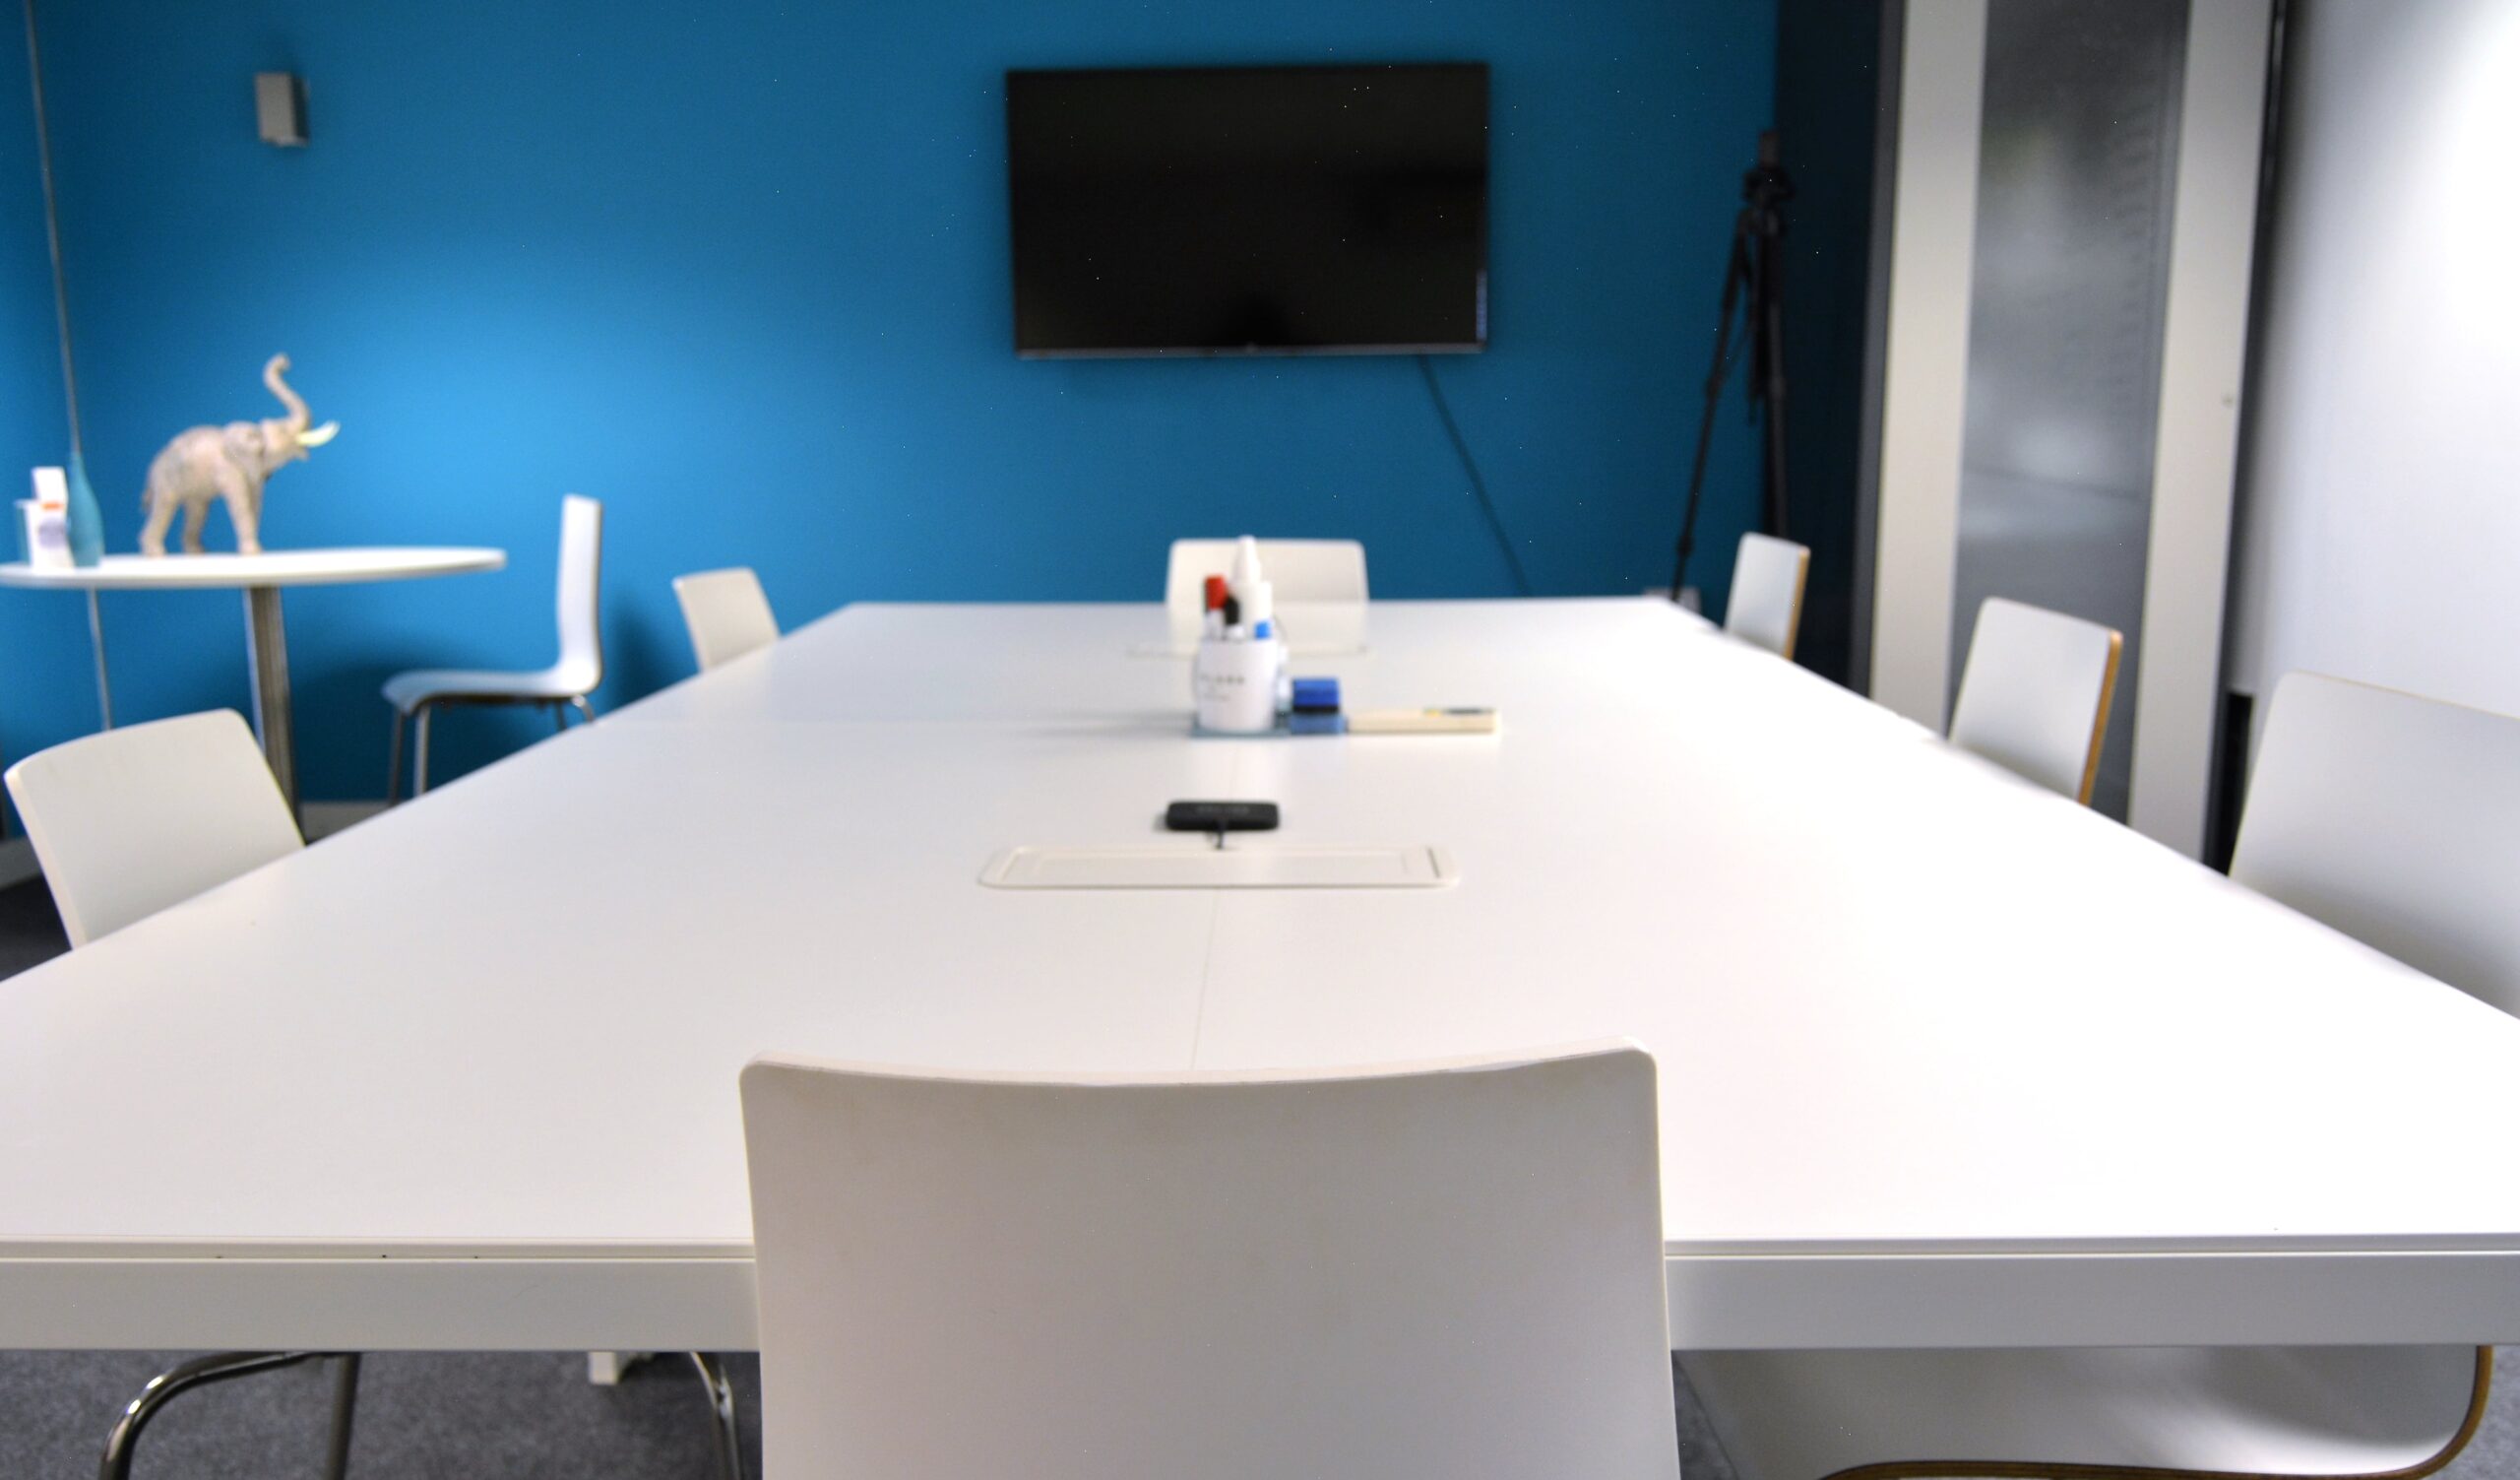 Meeting room hire Colchester with Koala Digital